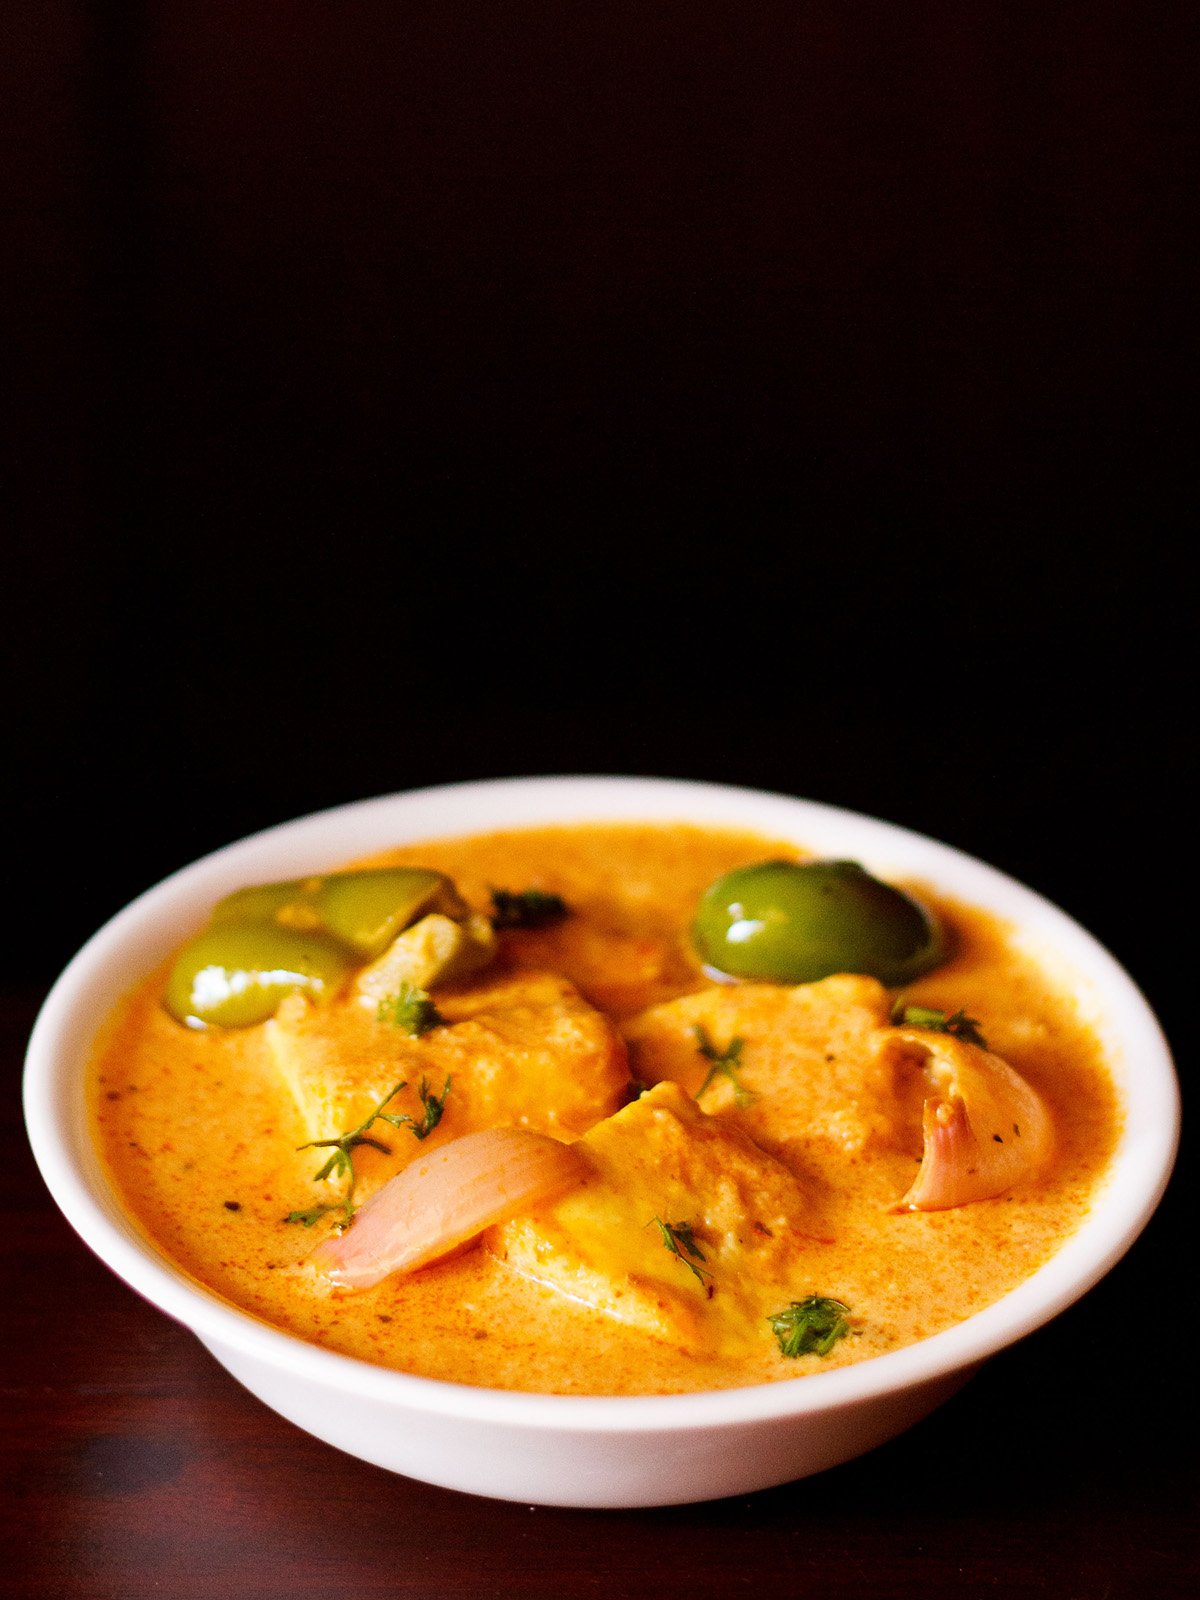 paneer tikka masala served in a white bowl garnished with some coriander leaves on a dark mahogany board